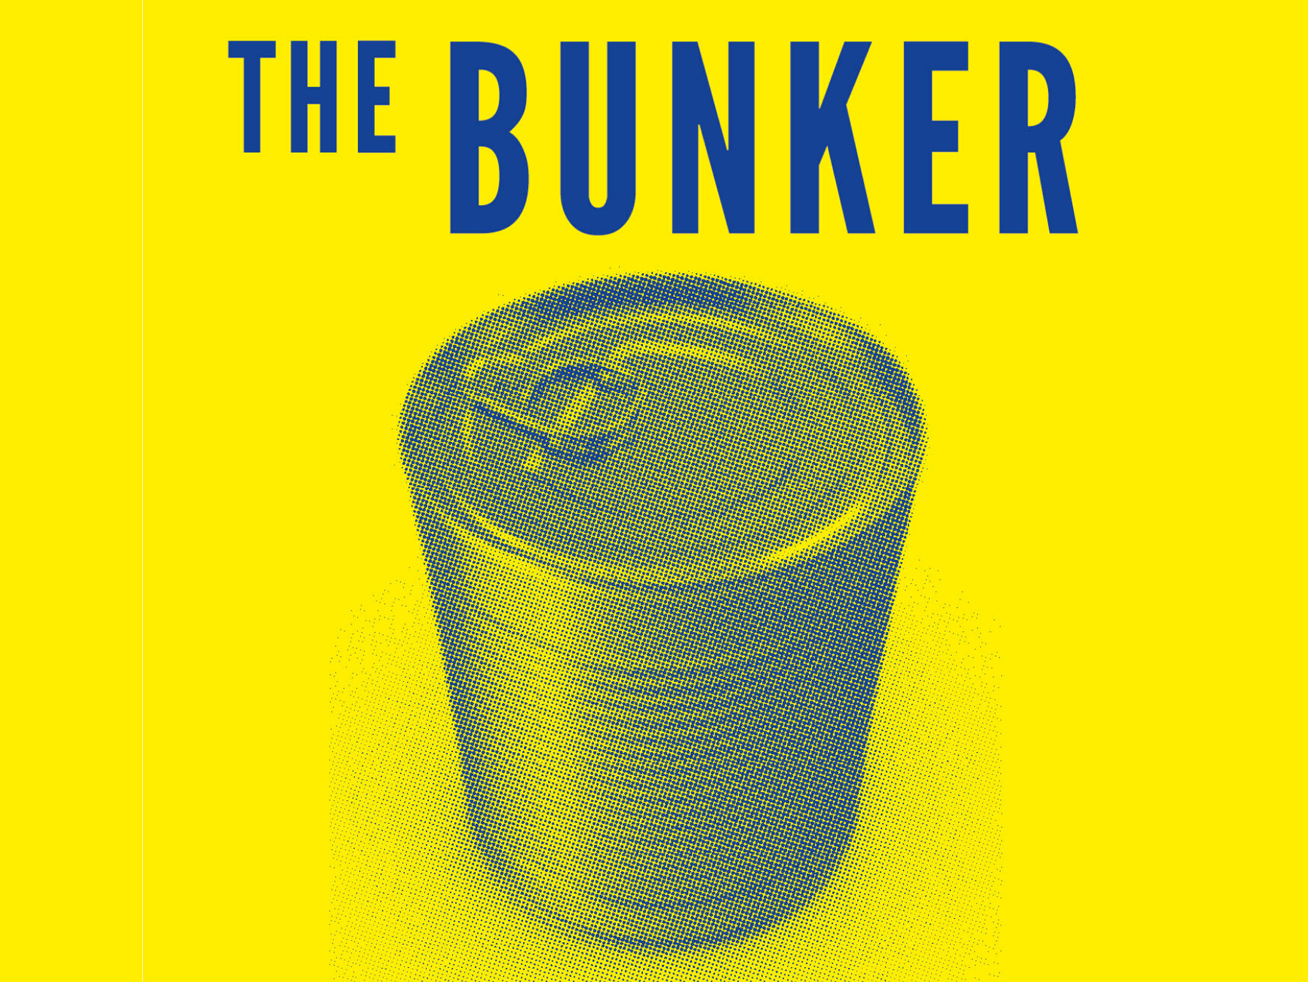 Podcast: The Bunker